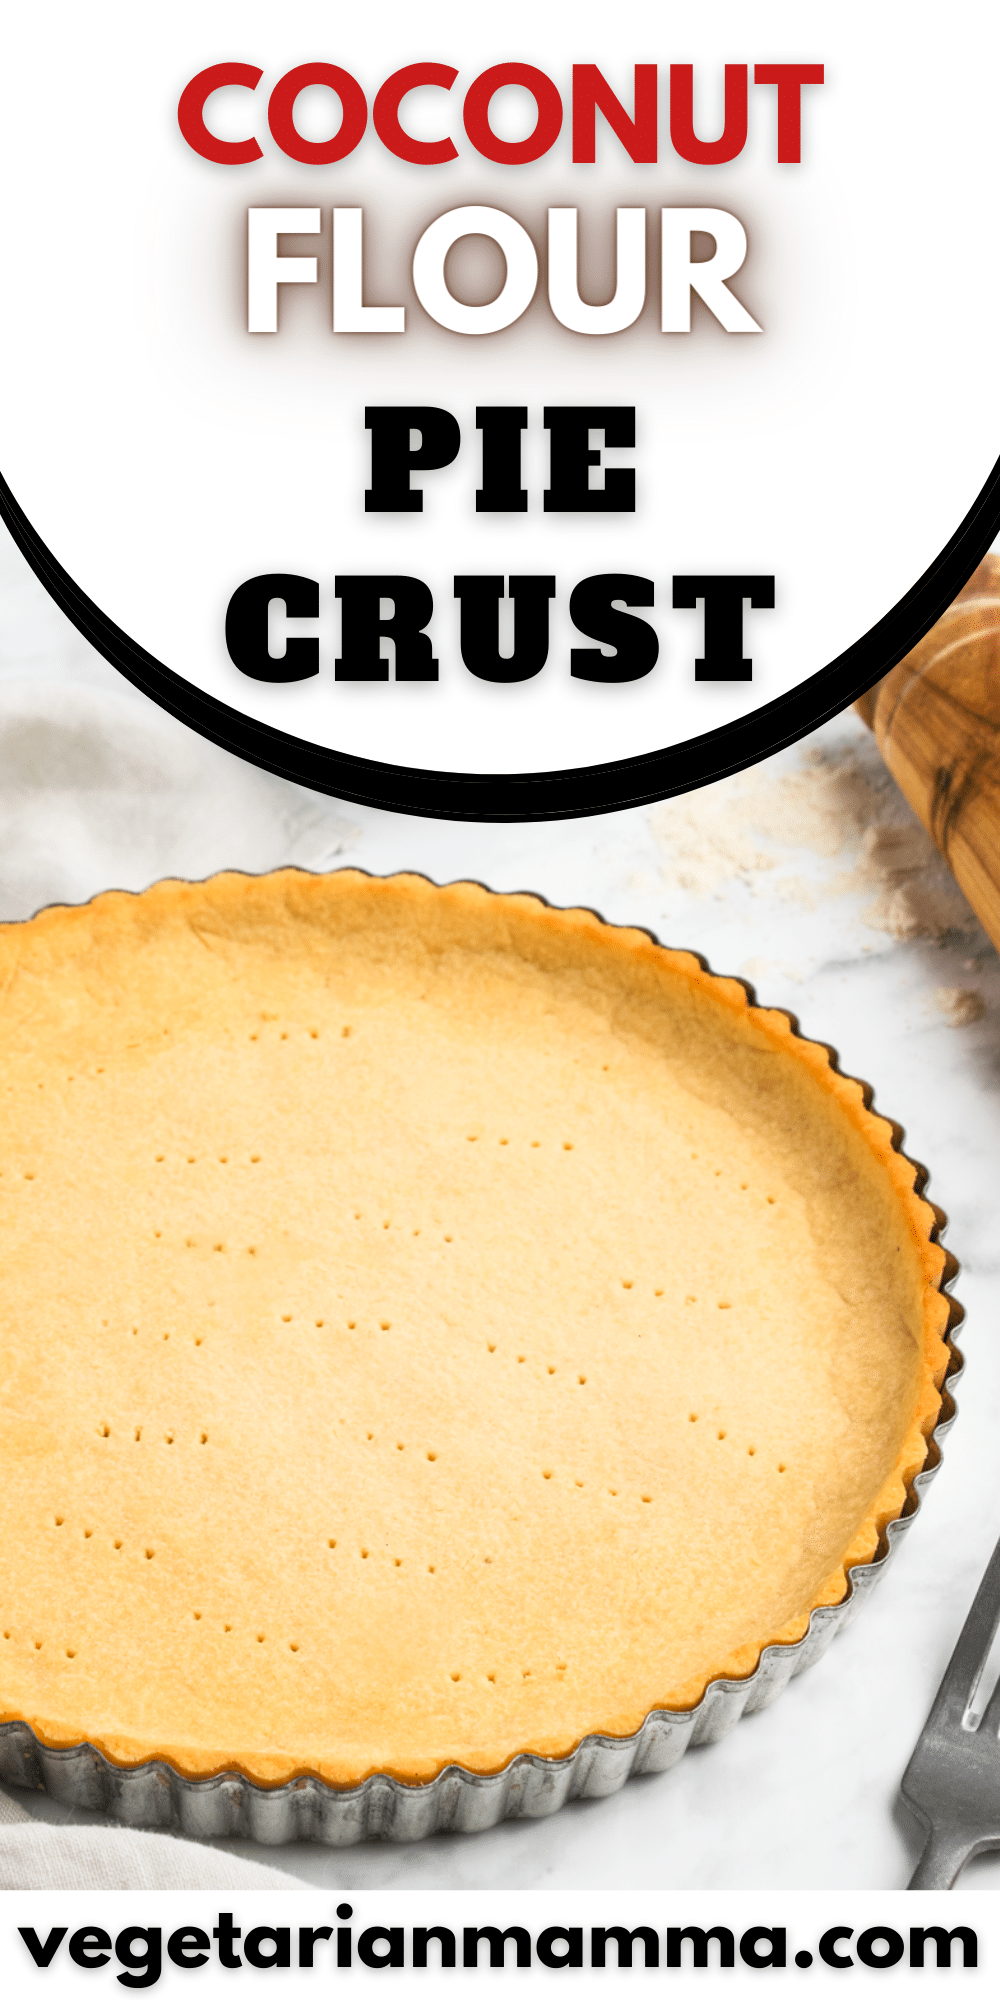 This easy, gluten-free, coconut flour pie crust is super simple to make, and will be the perfect base for all of your favorite pie fillings! You'll need just four ingredients to make this nut-free pie crust with coconut flour, and tips are included to make it sugar-free, vegan, dairy-free, low-carb, and keto too.